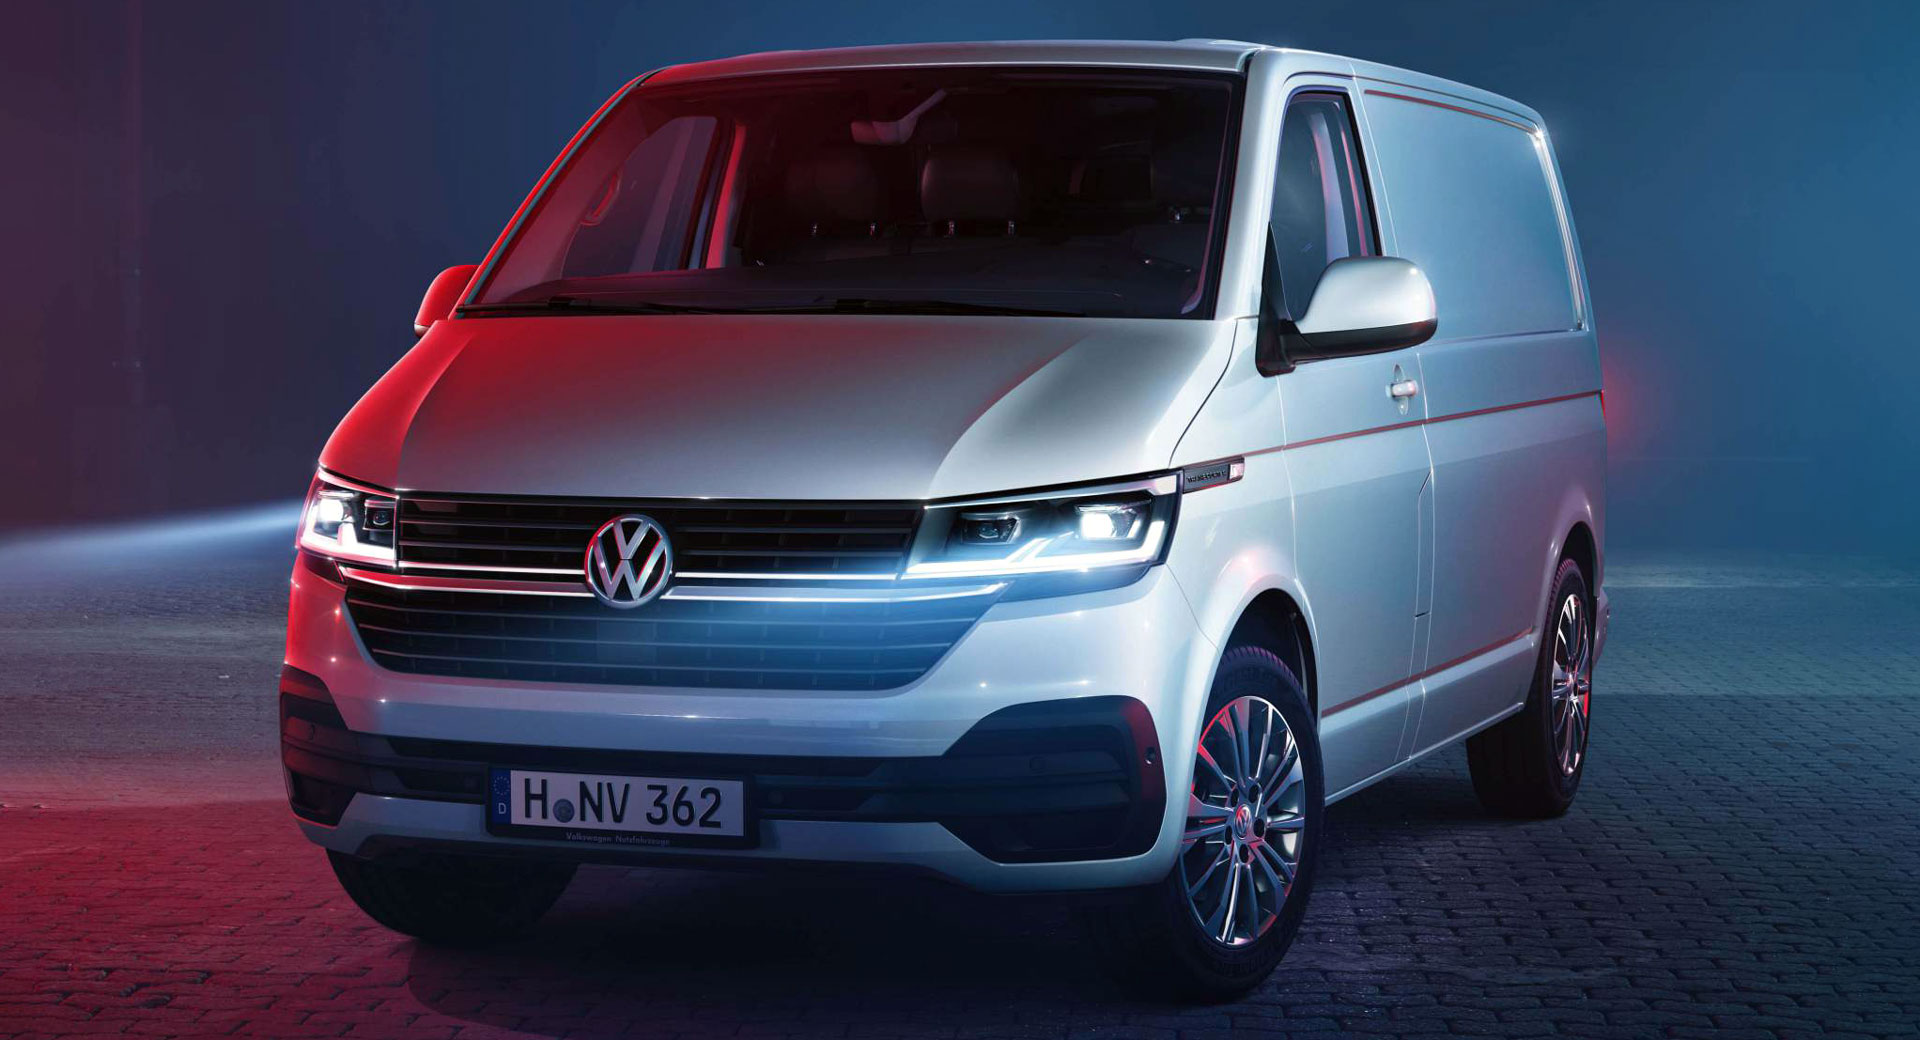 Facelifted 2019 VW Transporter 6.1 Is More Connected And HighTech Than